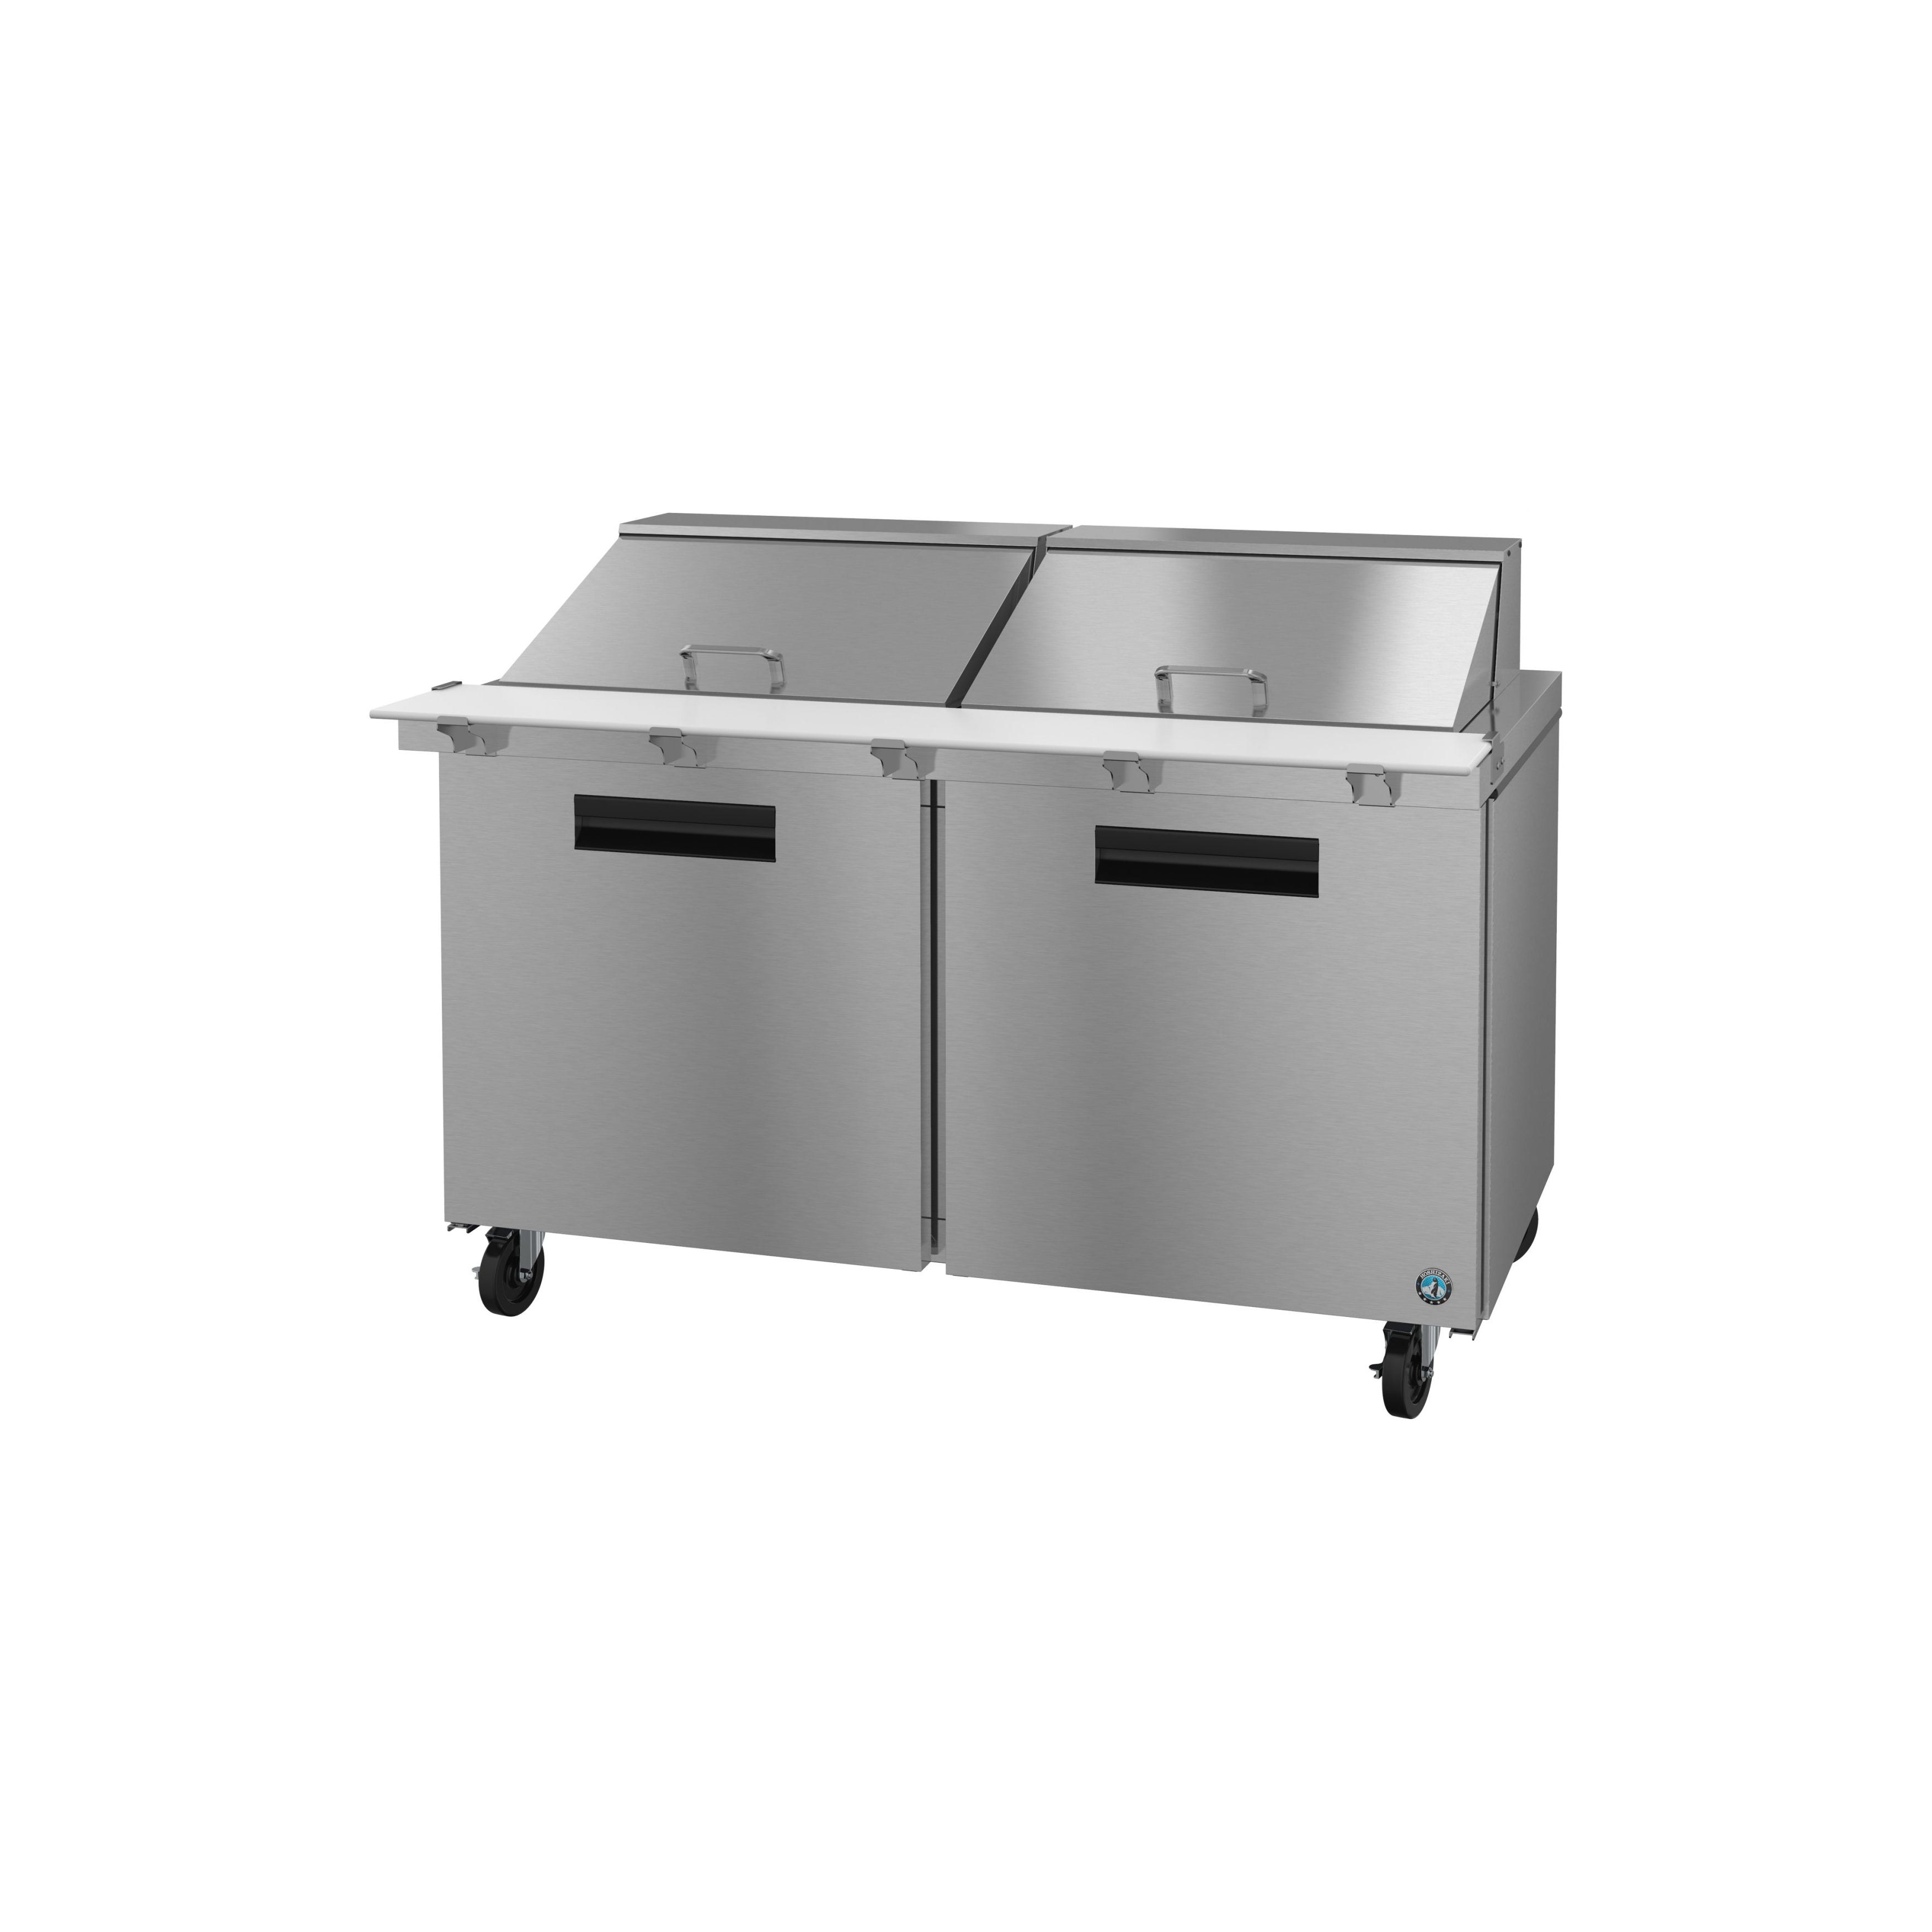 Hoshizaki - SR60B-24M, Commercial 60" Two Section Mega Top Prep Table, Stainless Doors 14.8cu.ft.